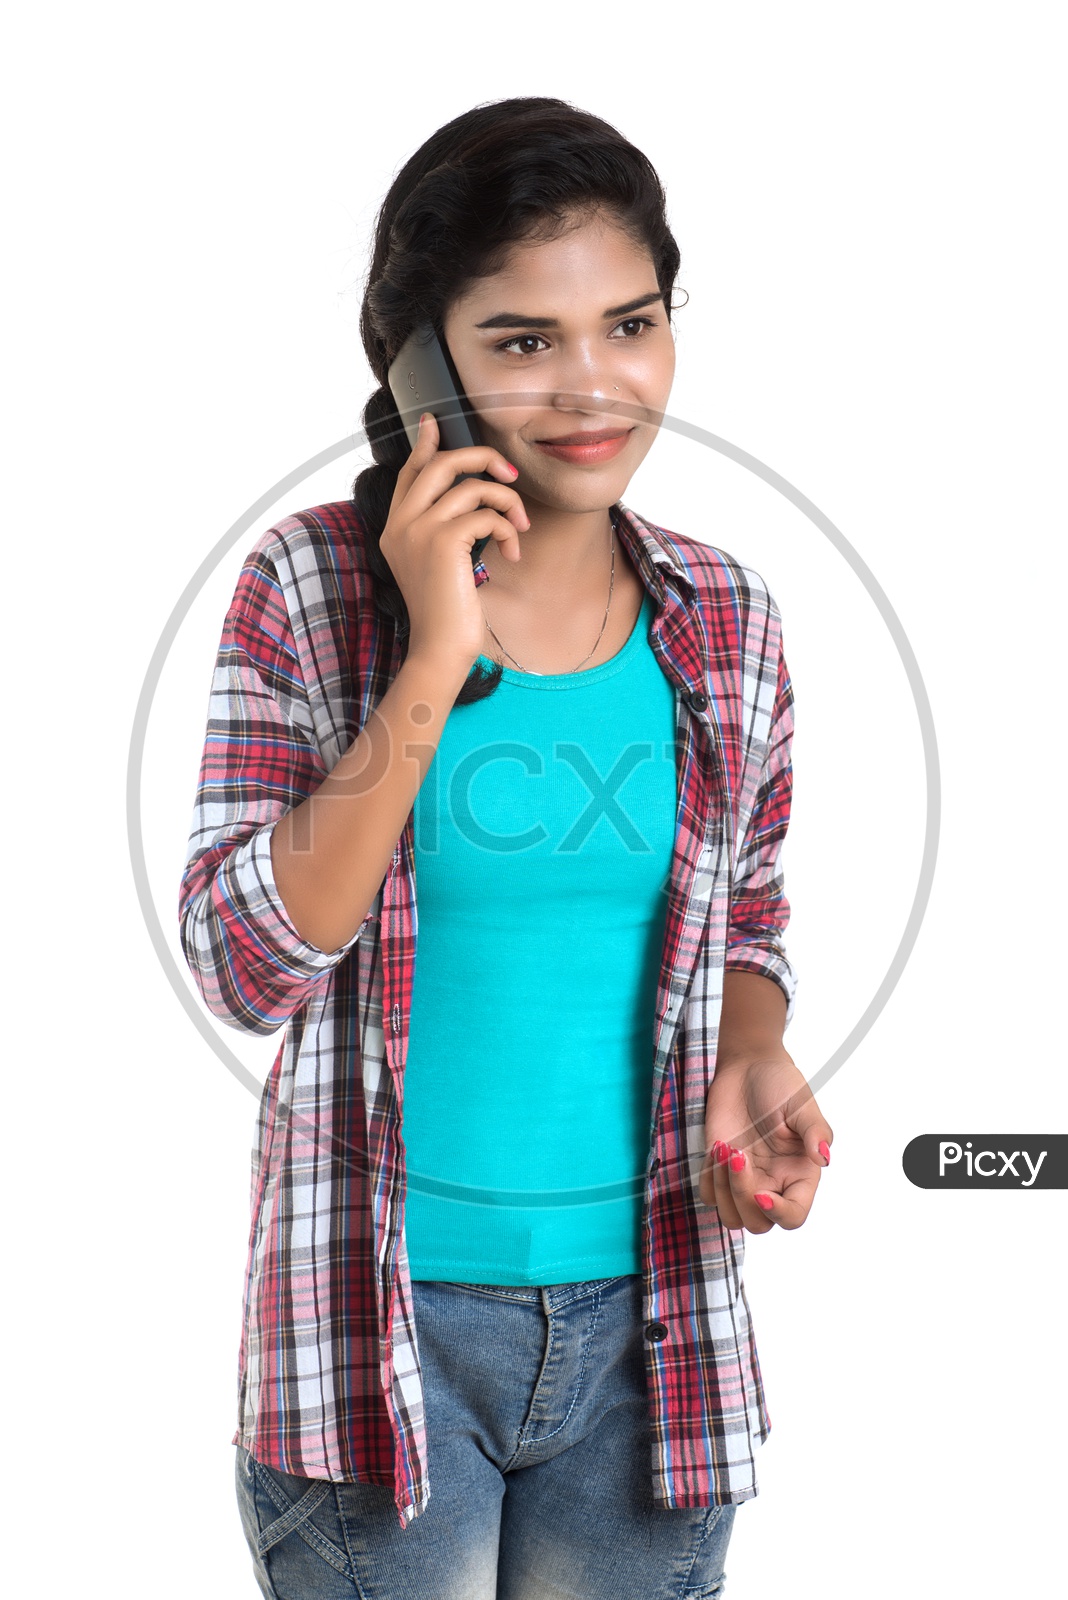 Young Indian Girl Talking In  Smart Phone On an Isolated White Background